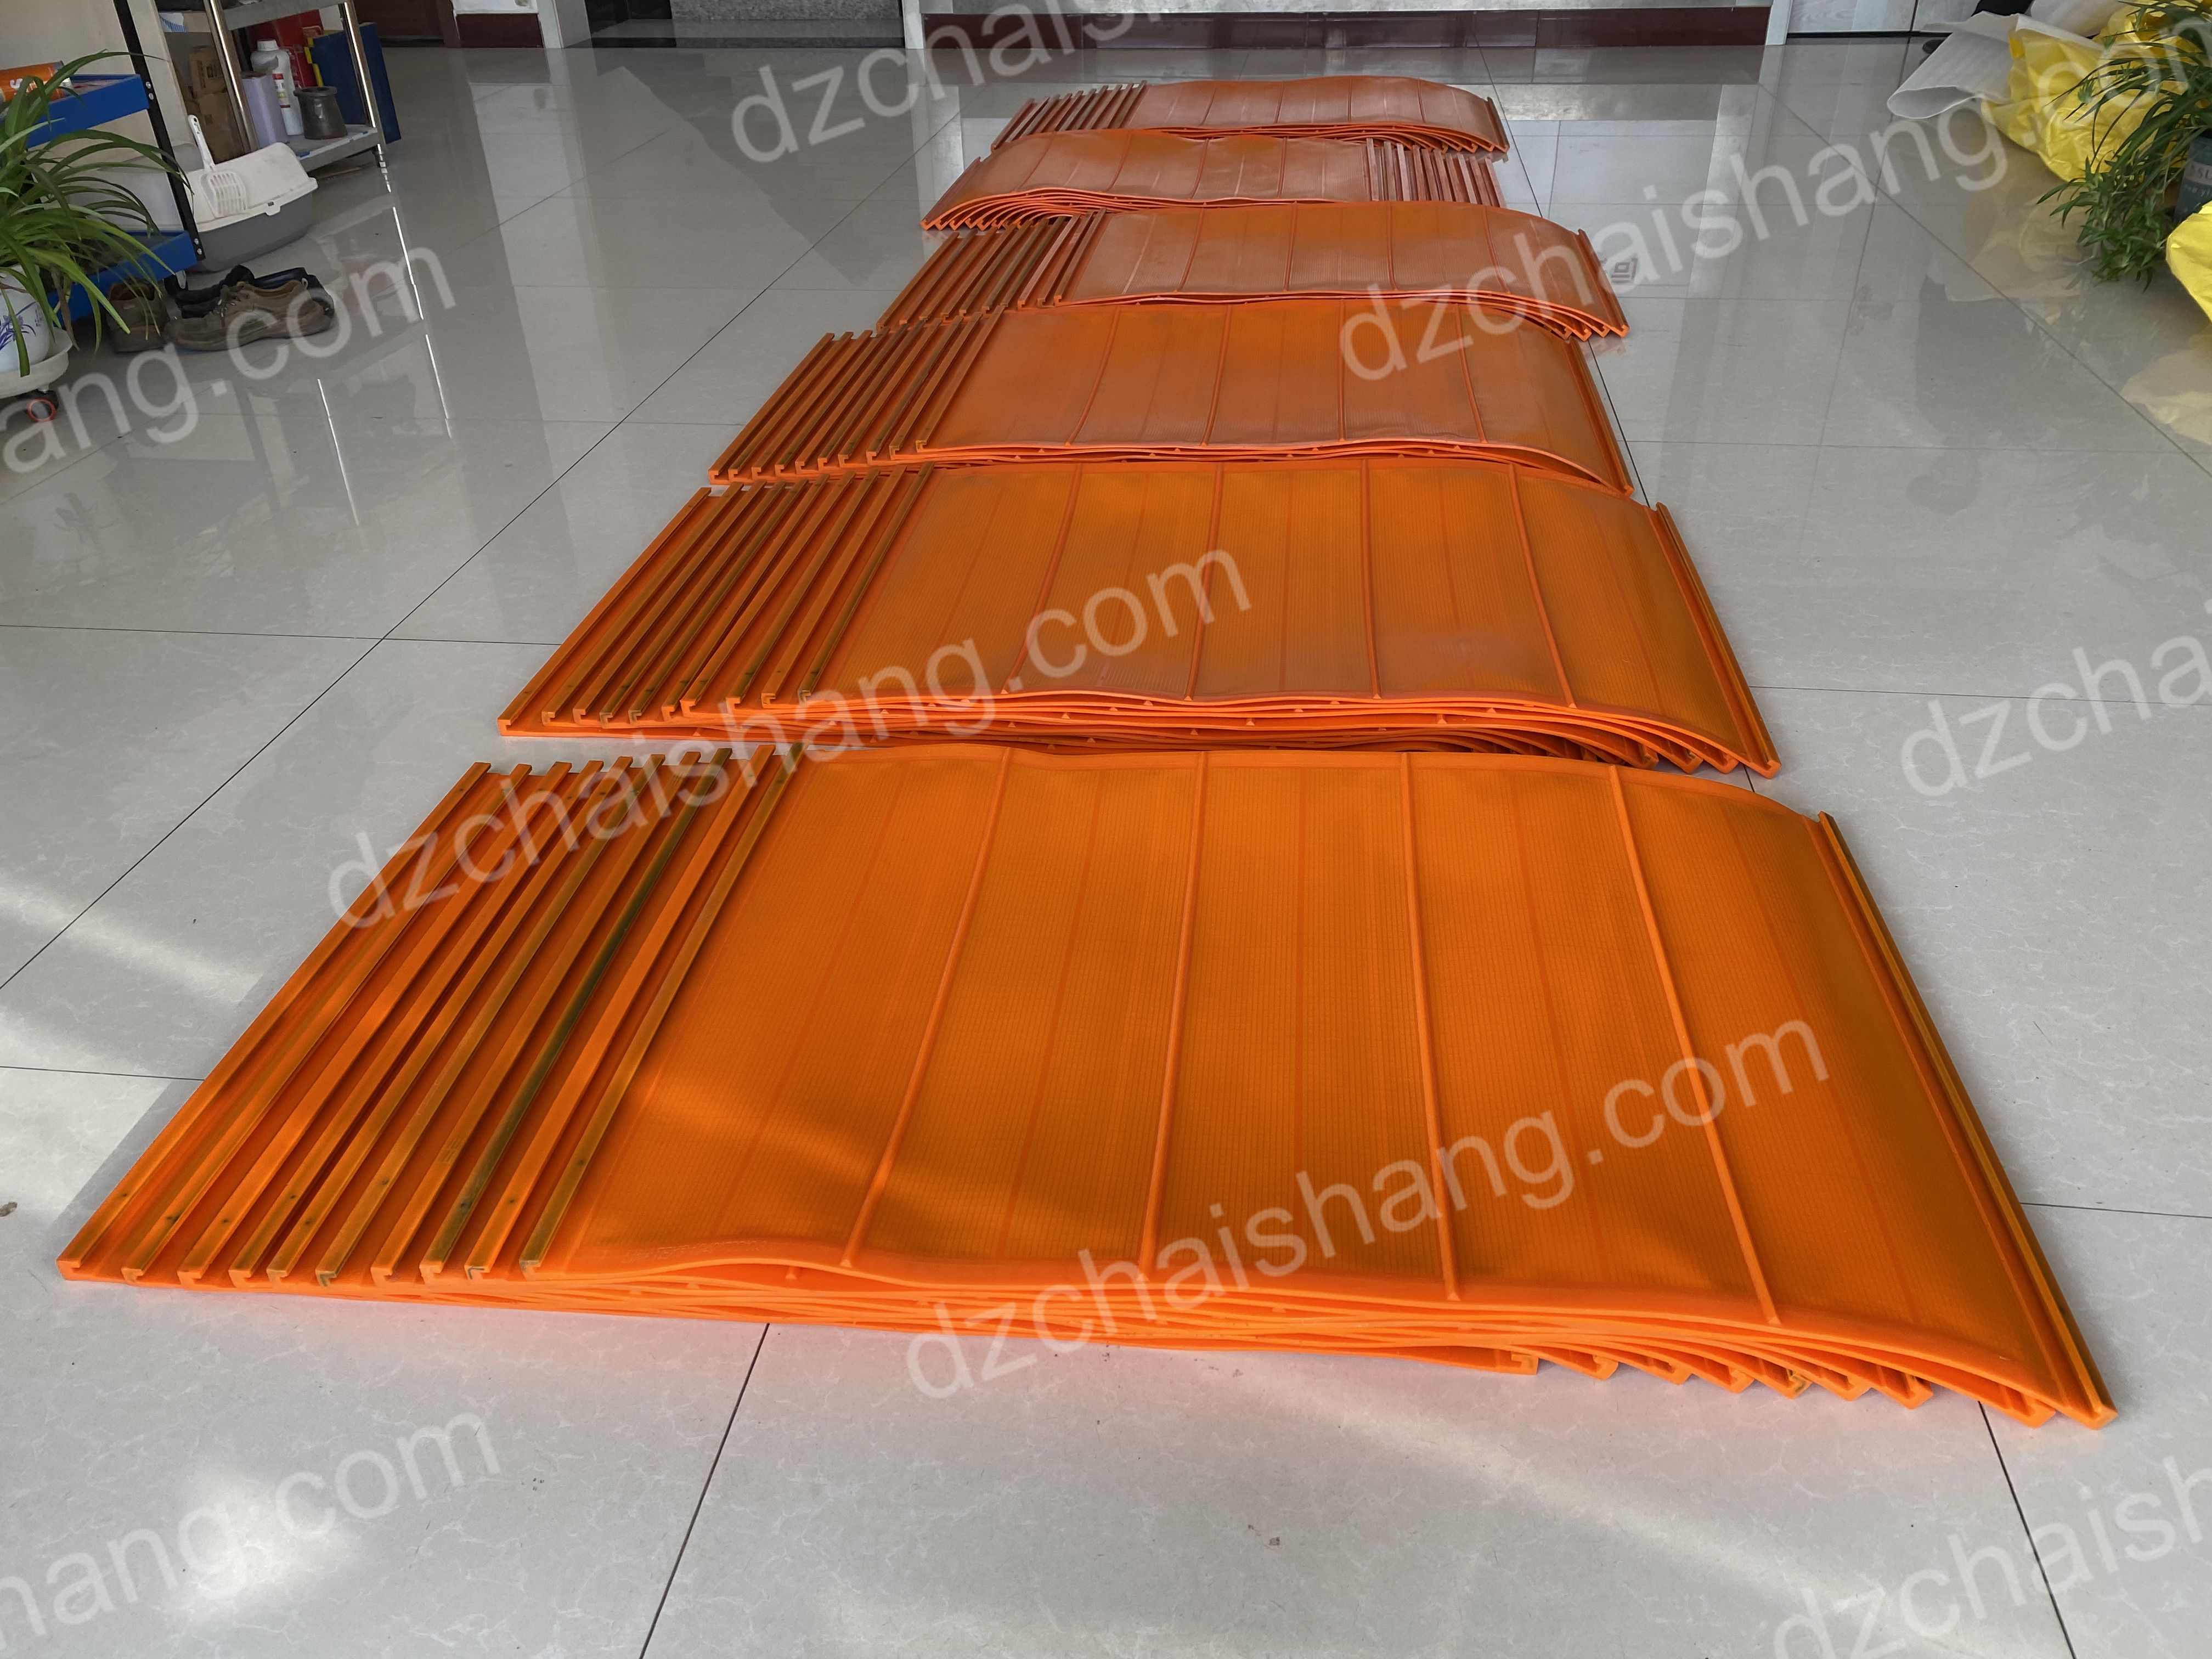 How to Find the Lowest Price Polyweb Polyurethane Plate Ore for Direct Selling PU High Frequency Deck Dewatering-CHAISHANG | Polyurethane Screen,Rubber Screen PanelsHigh frequency screen mesh,Belt Cleaner,Flotation Cell